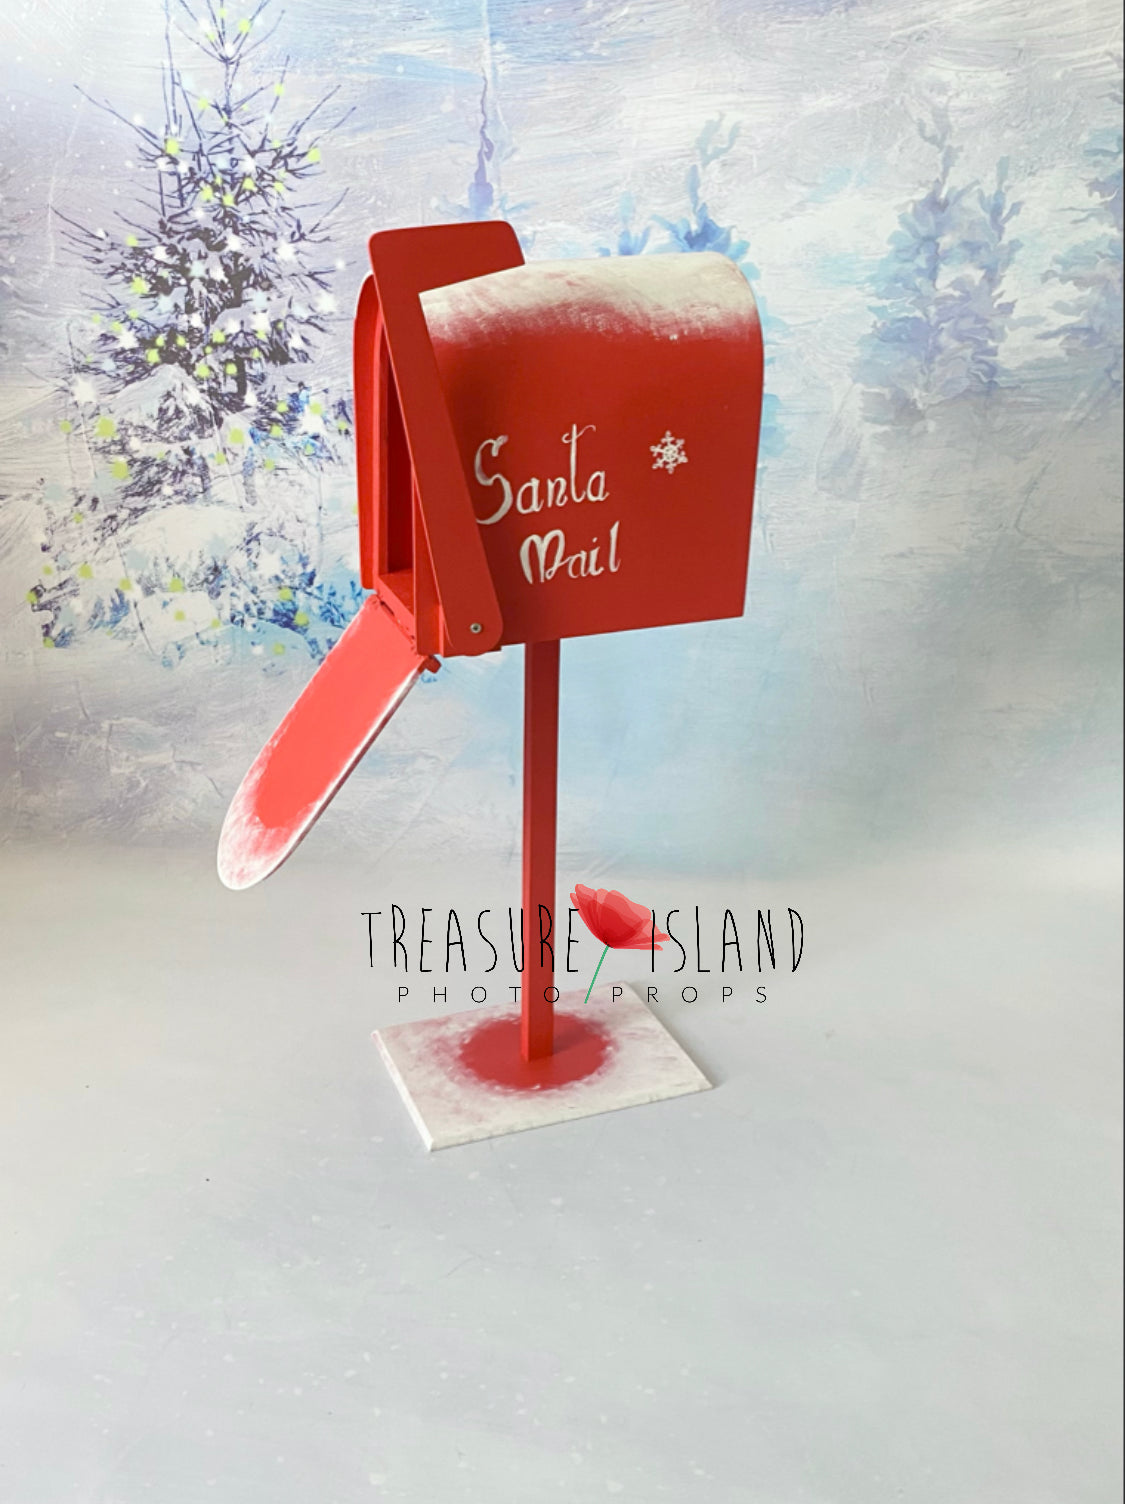 WOODEN LETTER BOX - WHITE with GOLD - Santa Mailbox Letters for Santa –  Treasure Island Photo Props